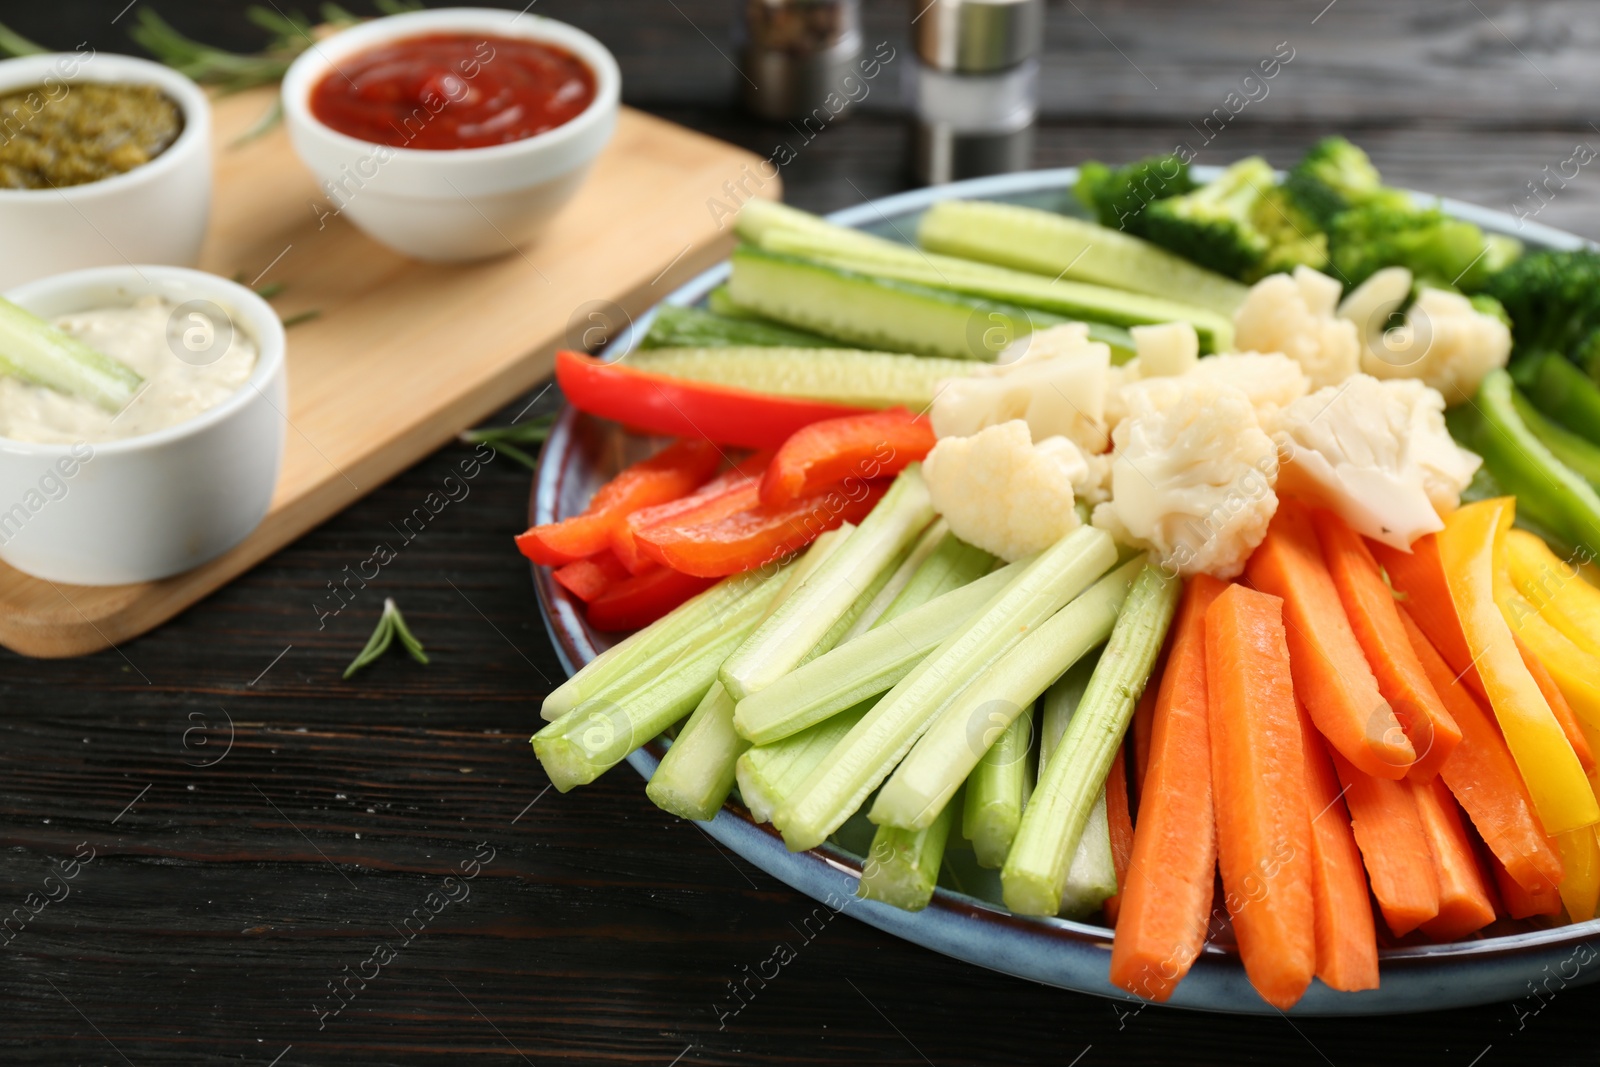 Photo of Plate with celery sticks, other vegetables and different dip sauces on dark wooden table, closeup